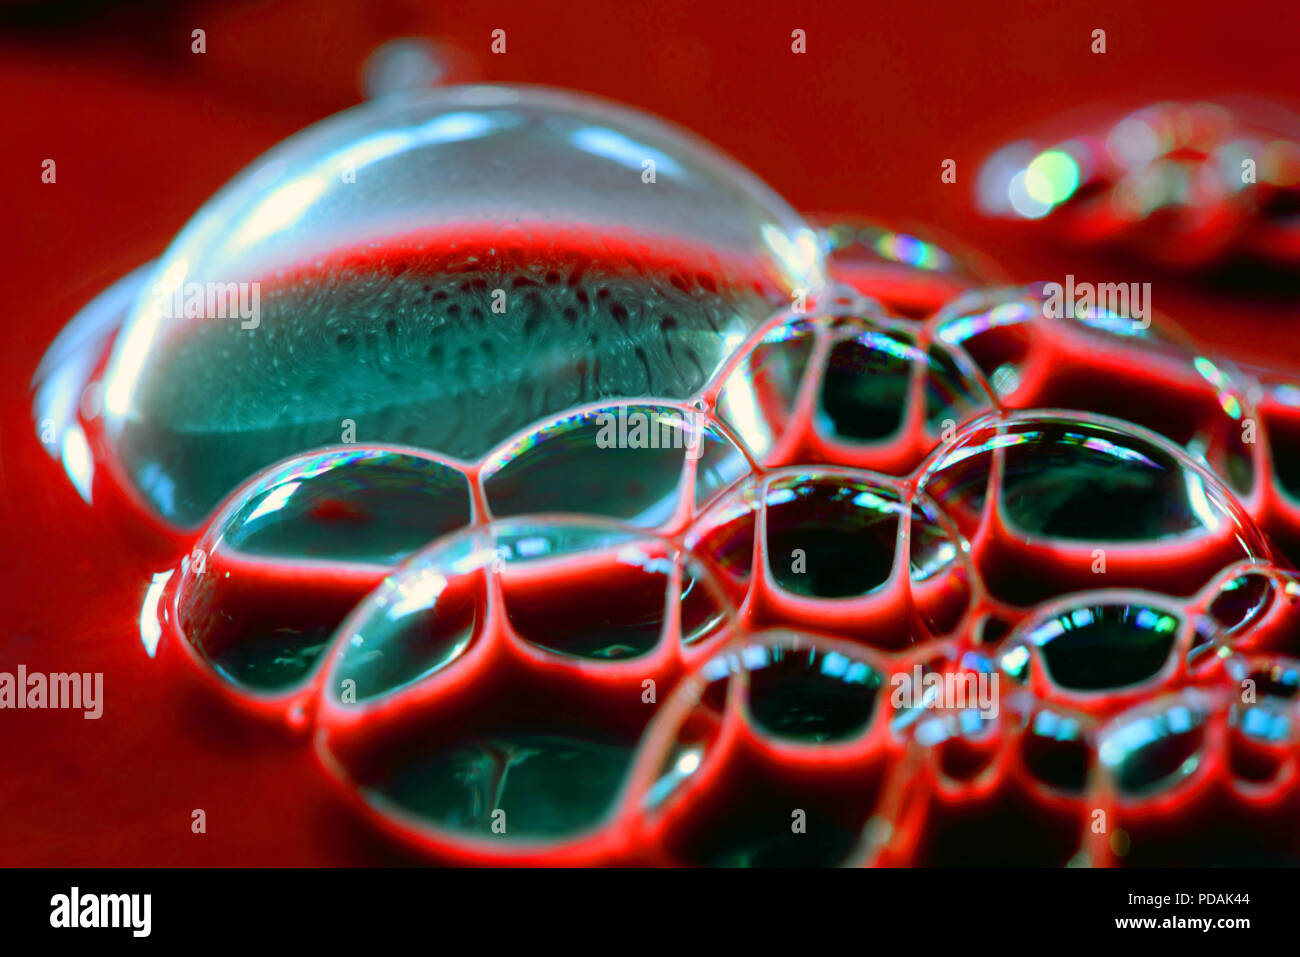 Blood bubbles on the surface of a dark red liquid Stock Photo